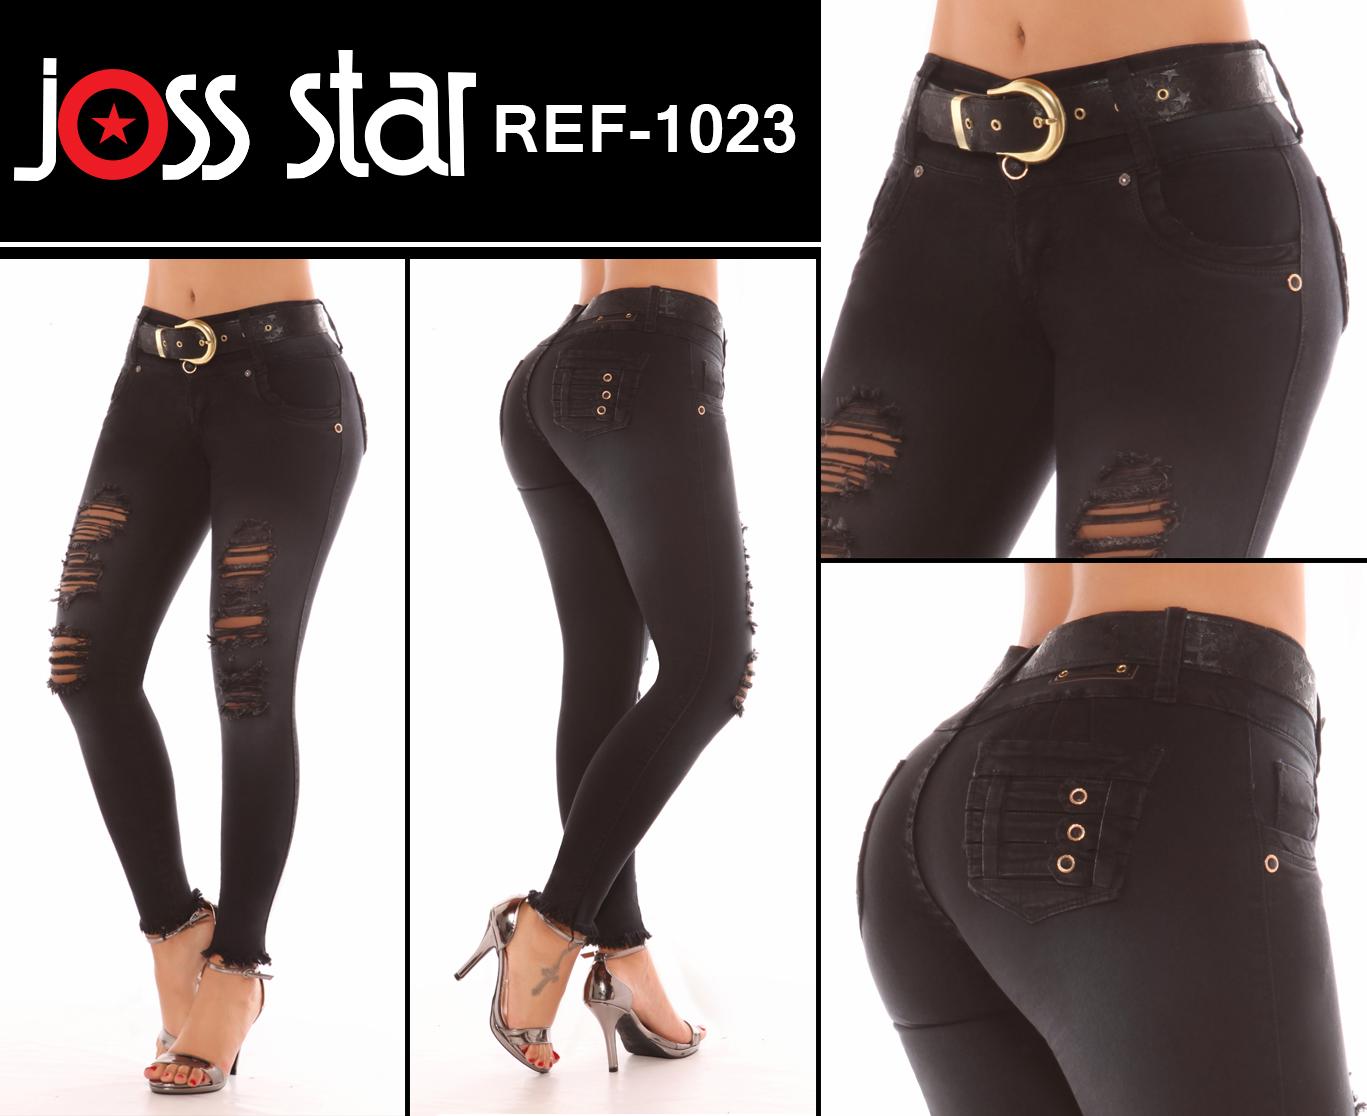 Jean Colombian Black Fashion with Butt Enhancement